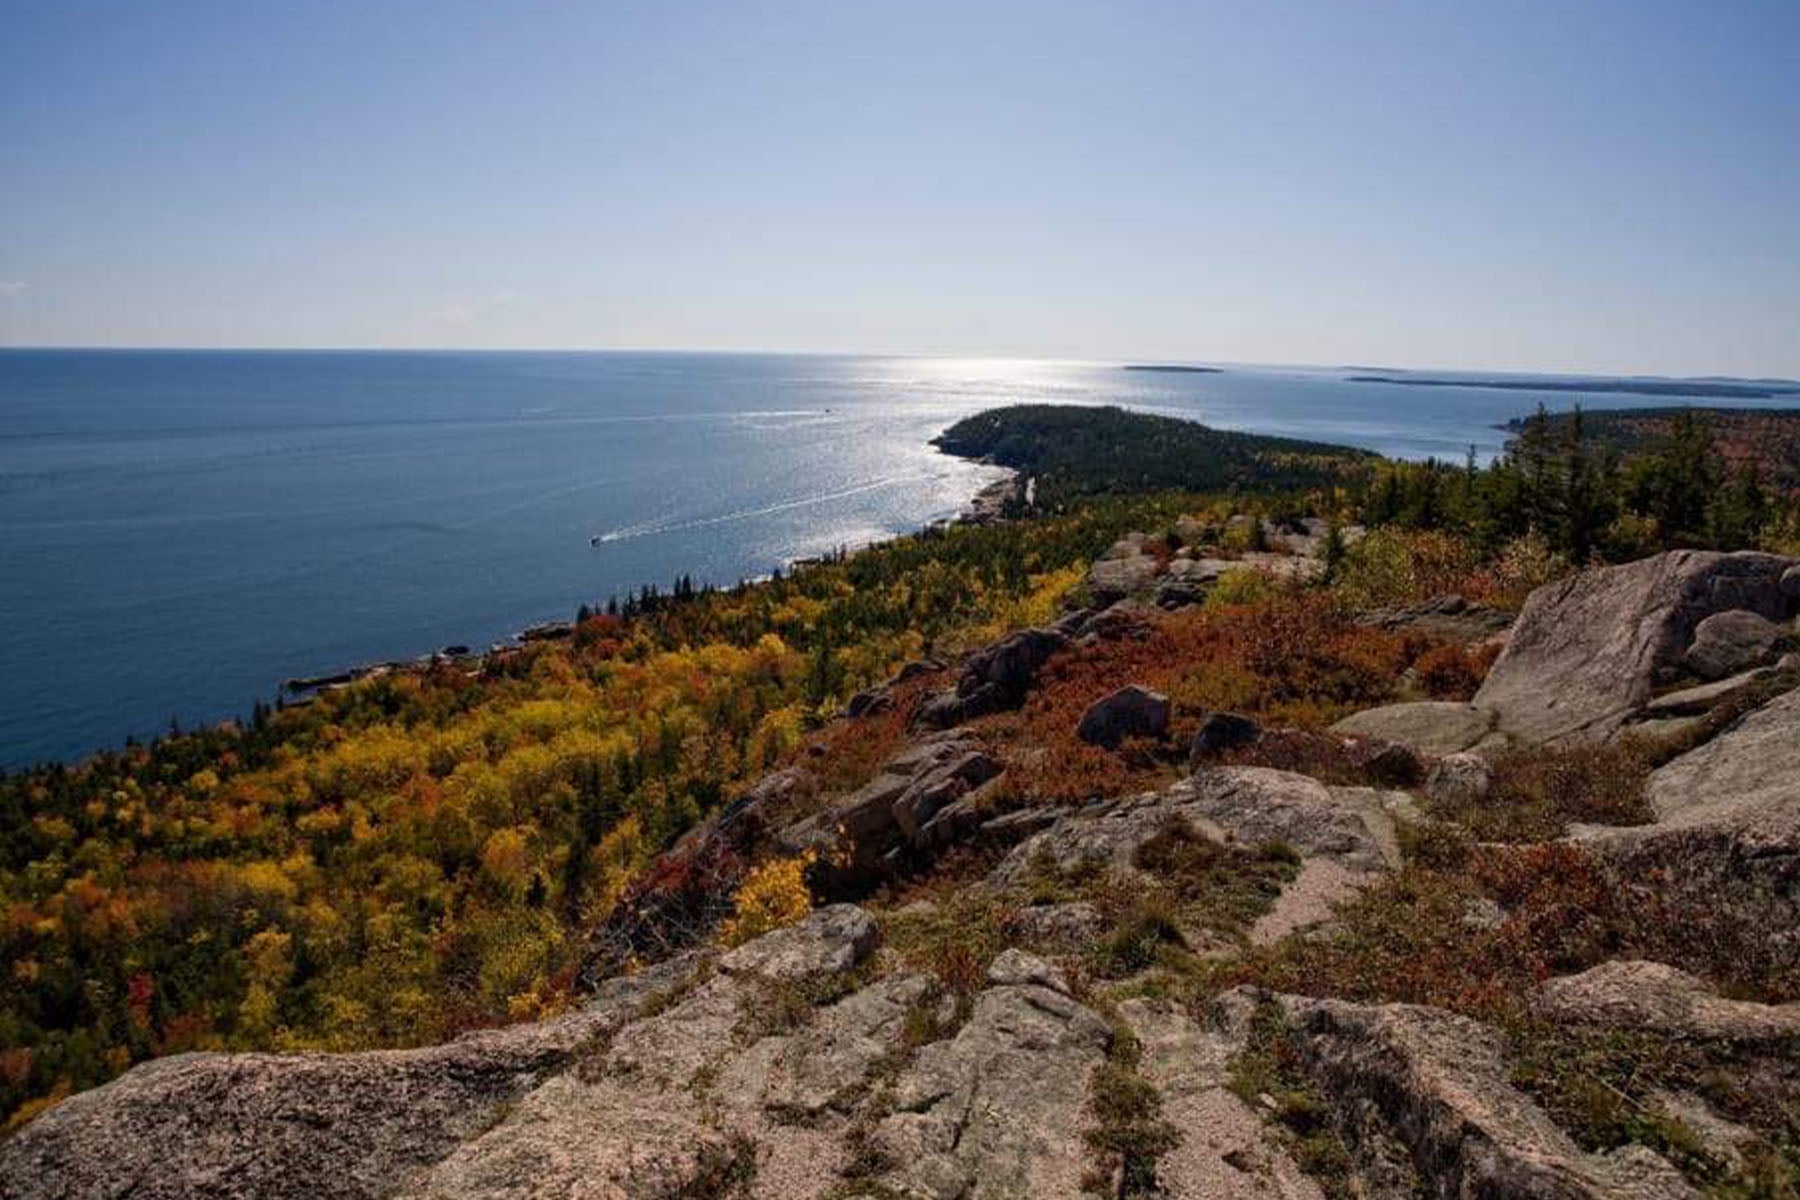 View of Acadia National Park